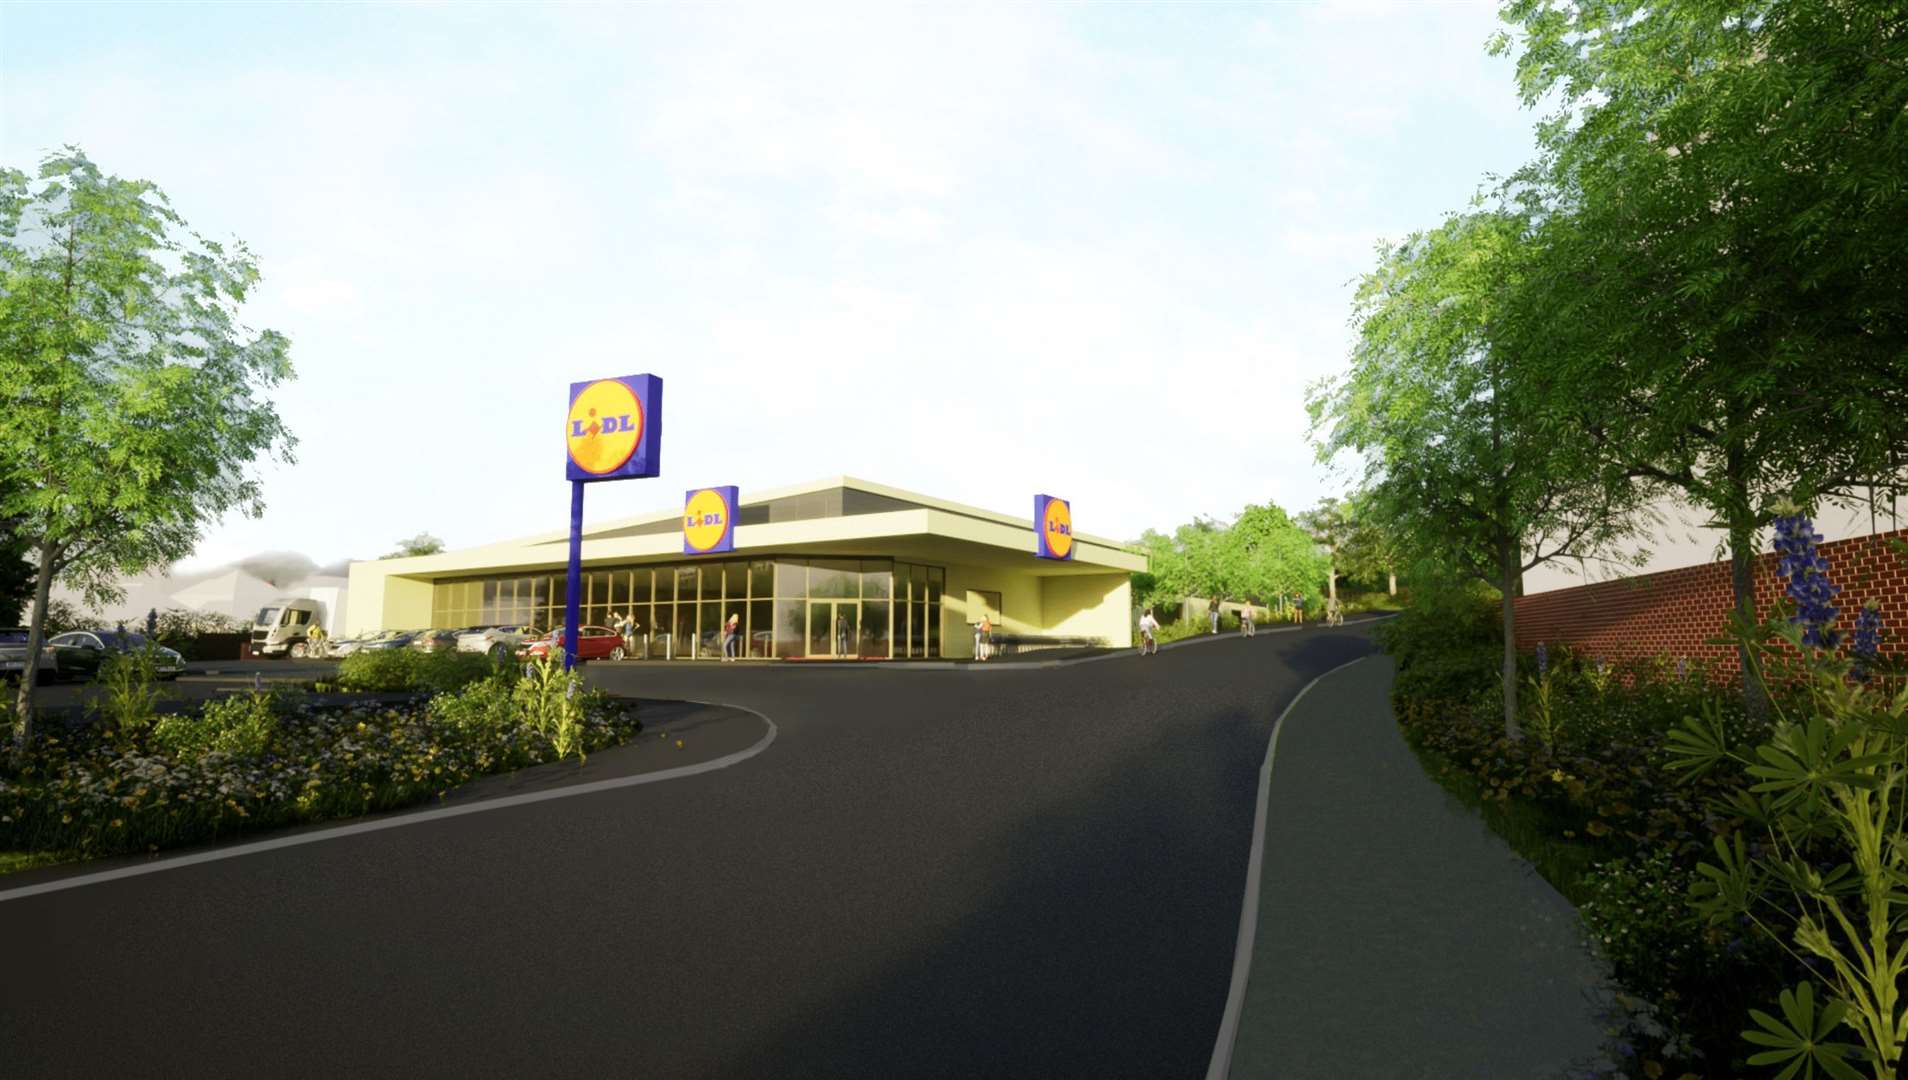 There are plans for Lidl supermarket on London Road, in Swanley